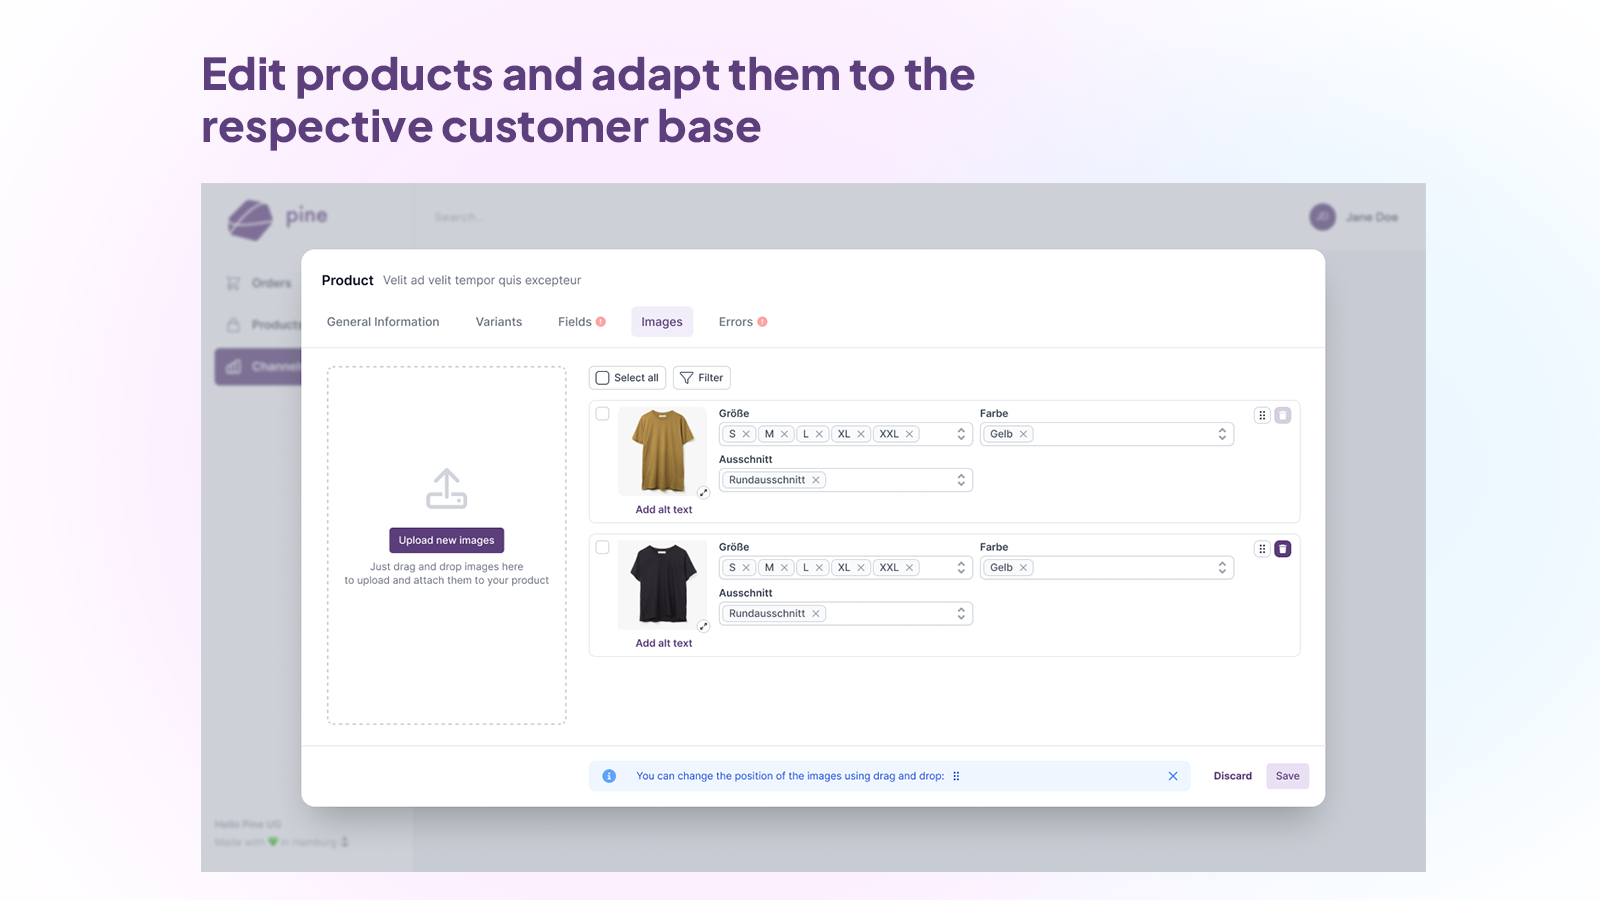 Edit products and adapt them to the respective customer base